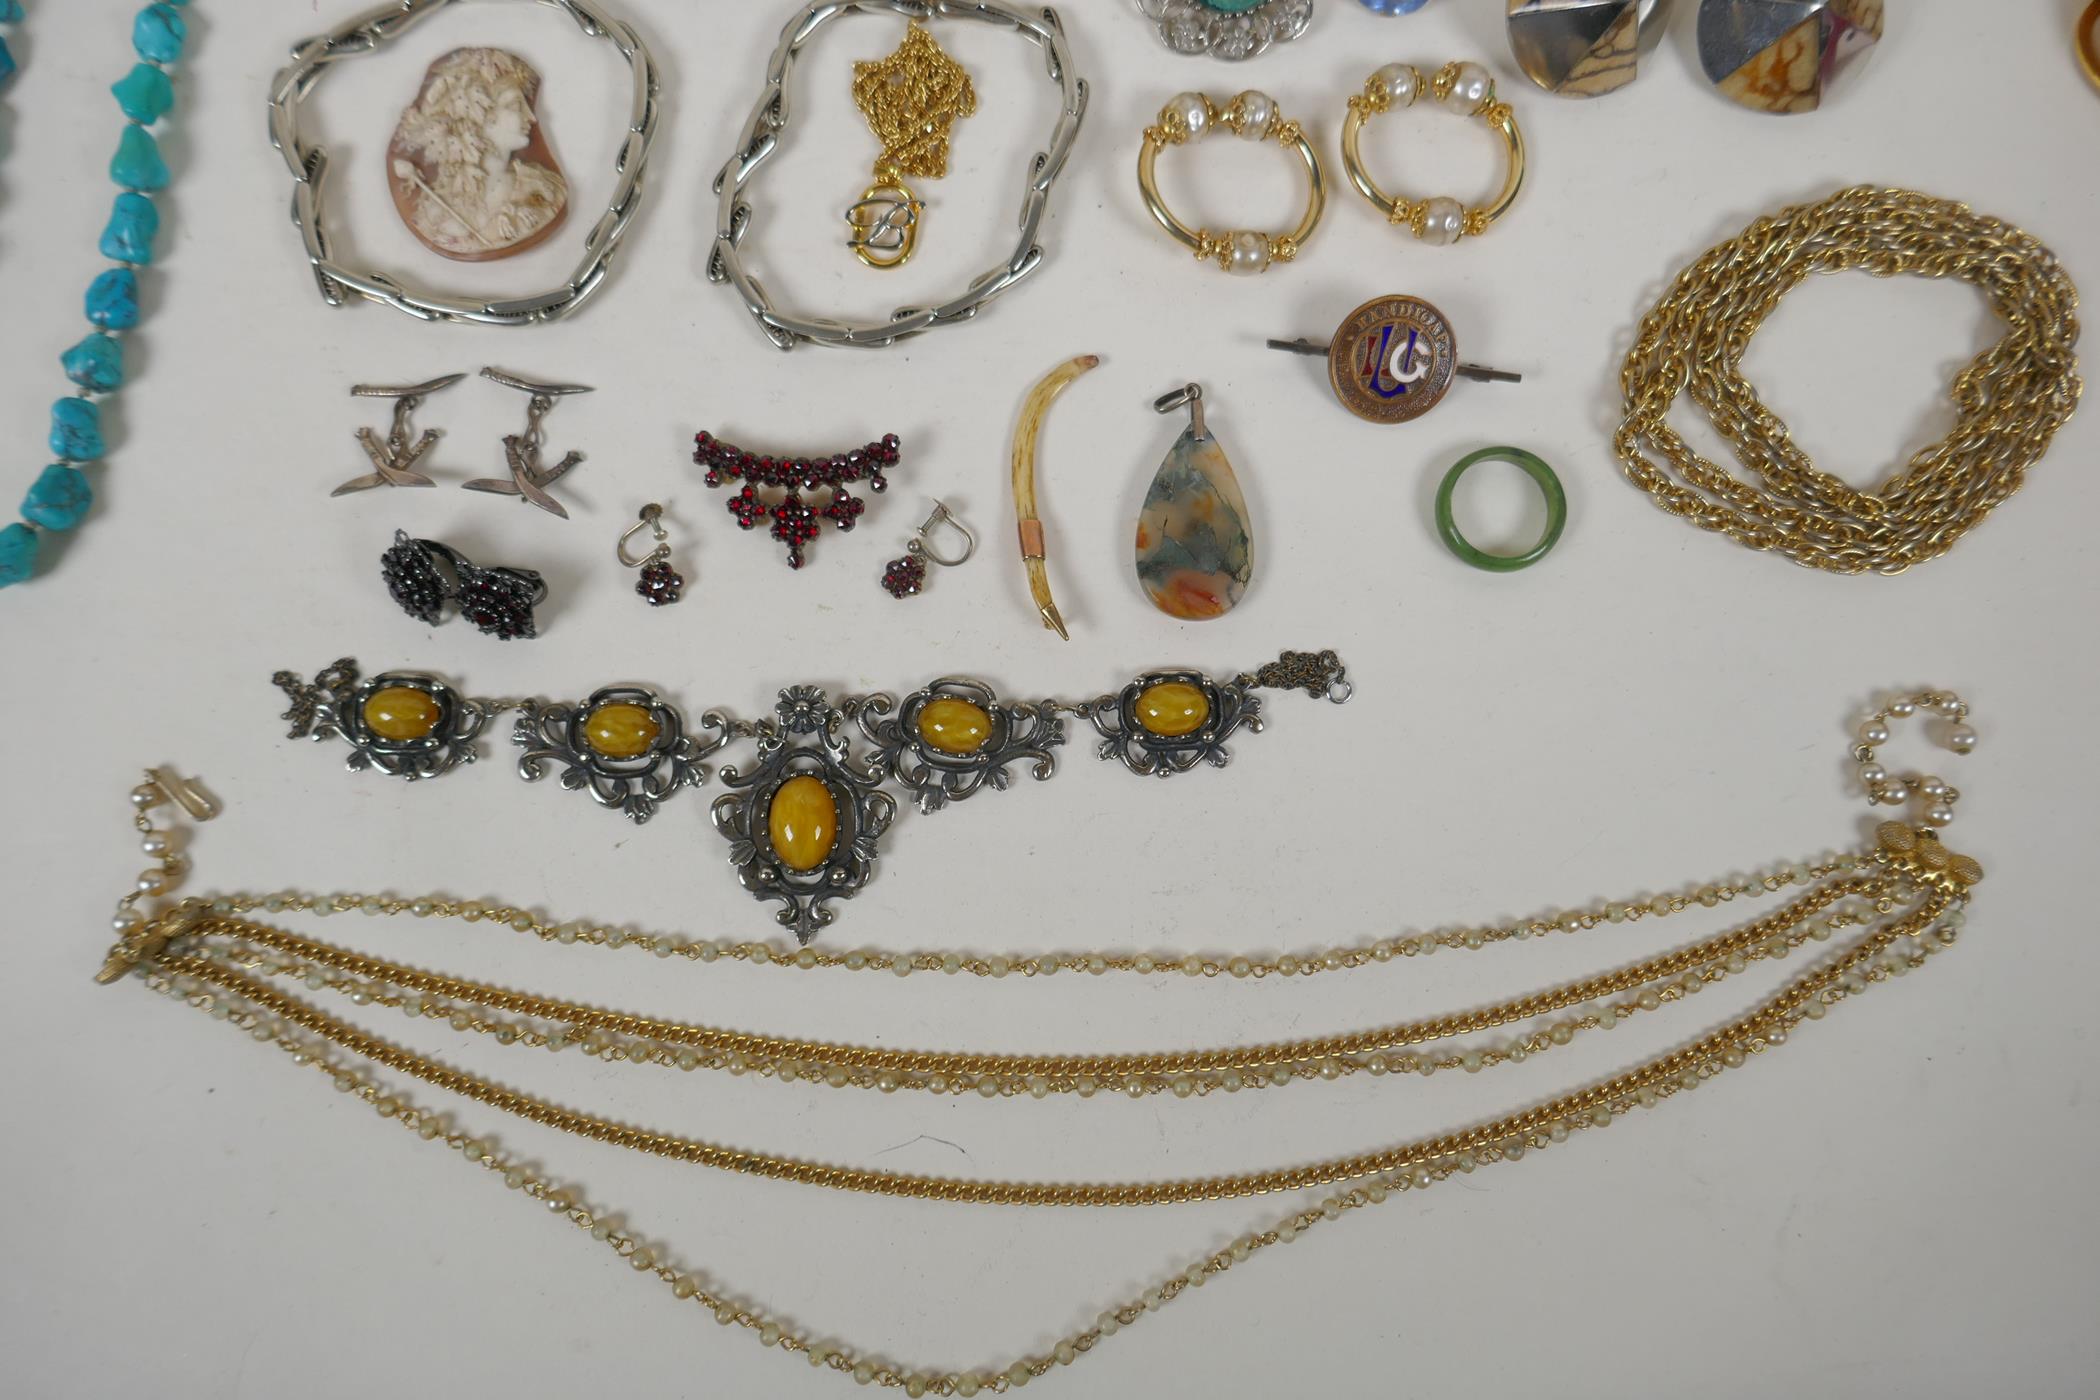 A collection of good quality vintage costume jewellery including brooches, necklaces, earrings, - Image 4 of 8